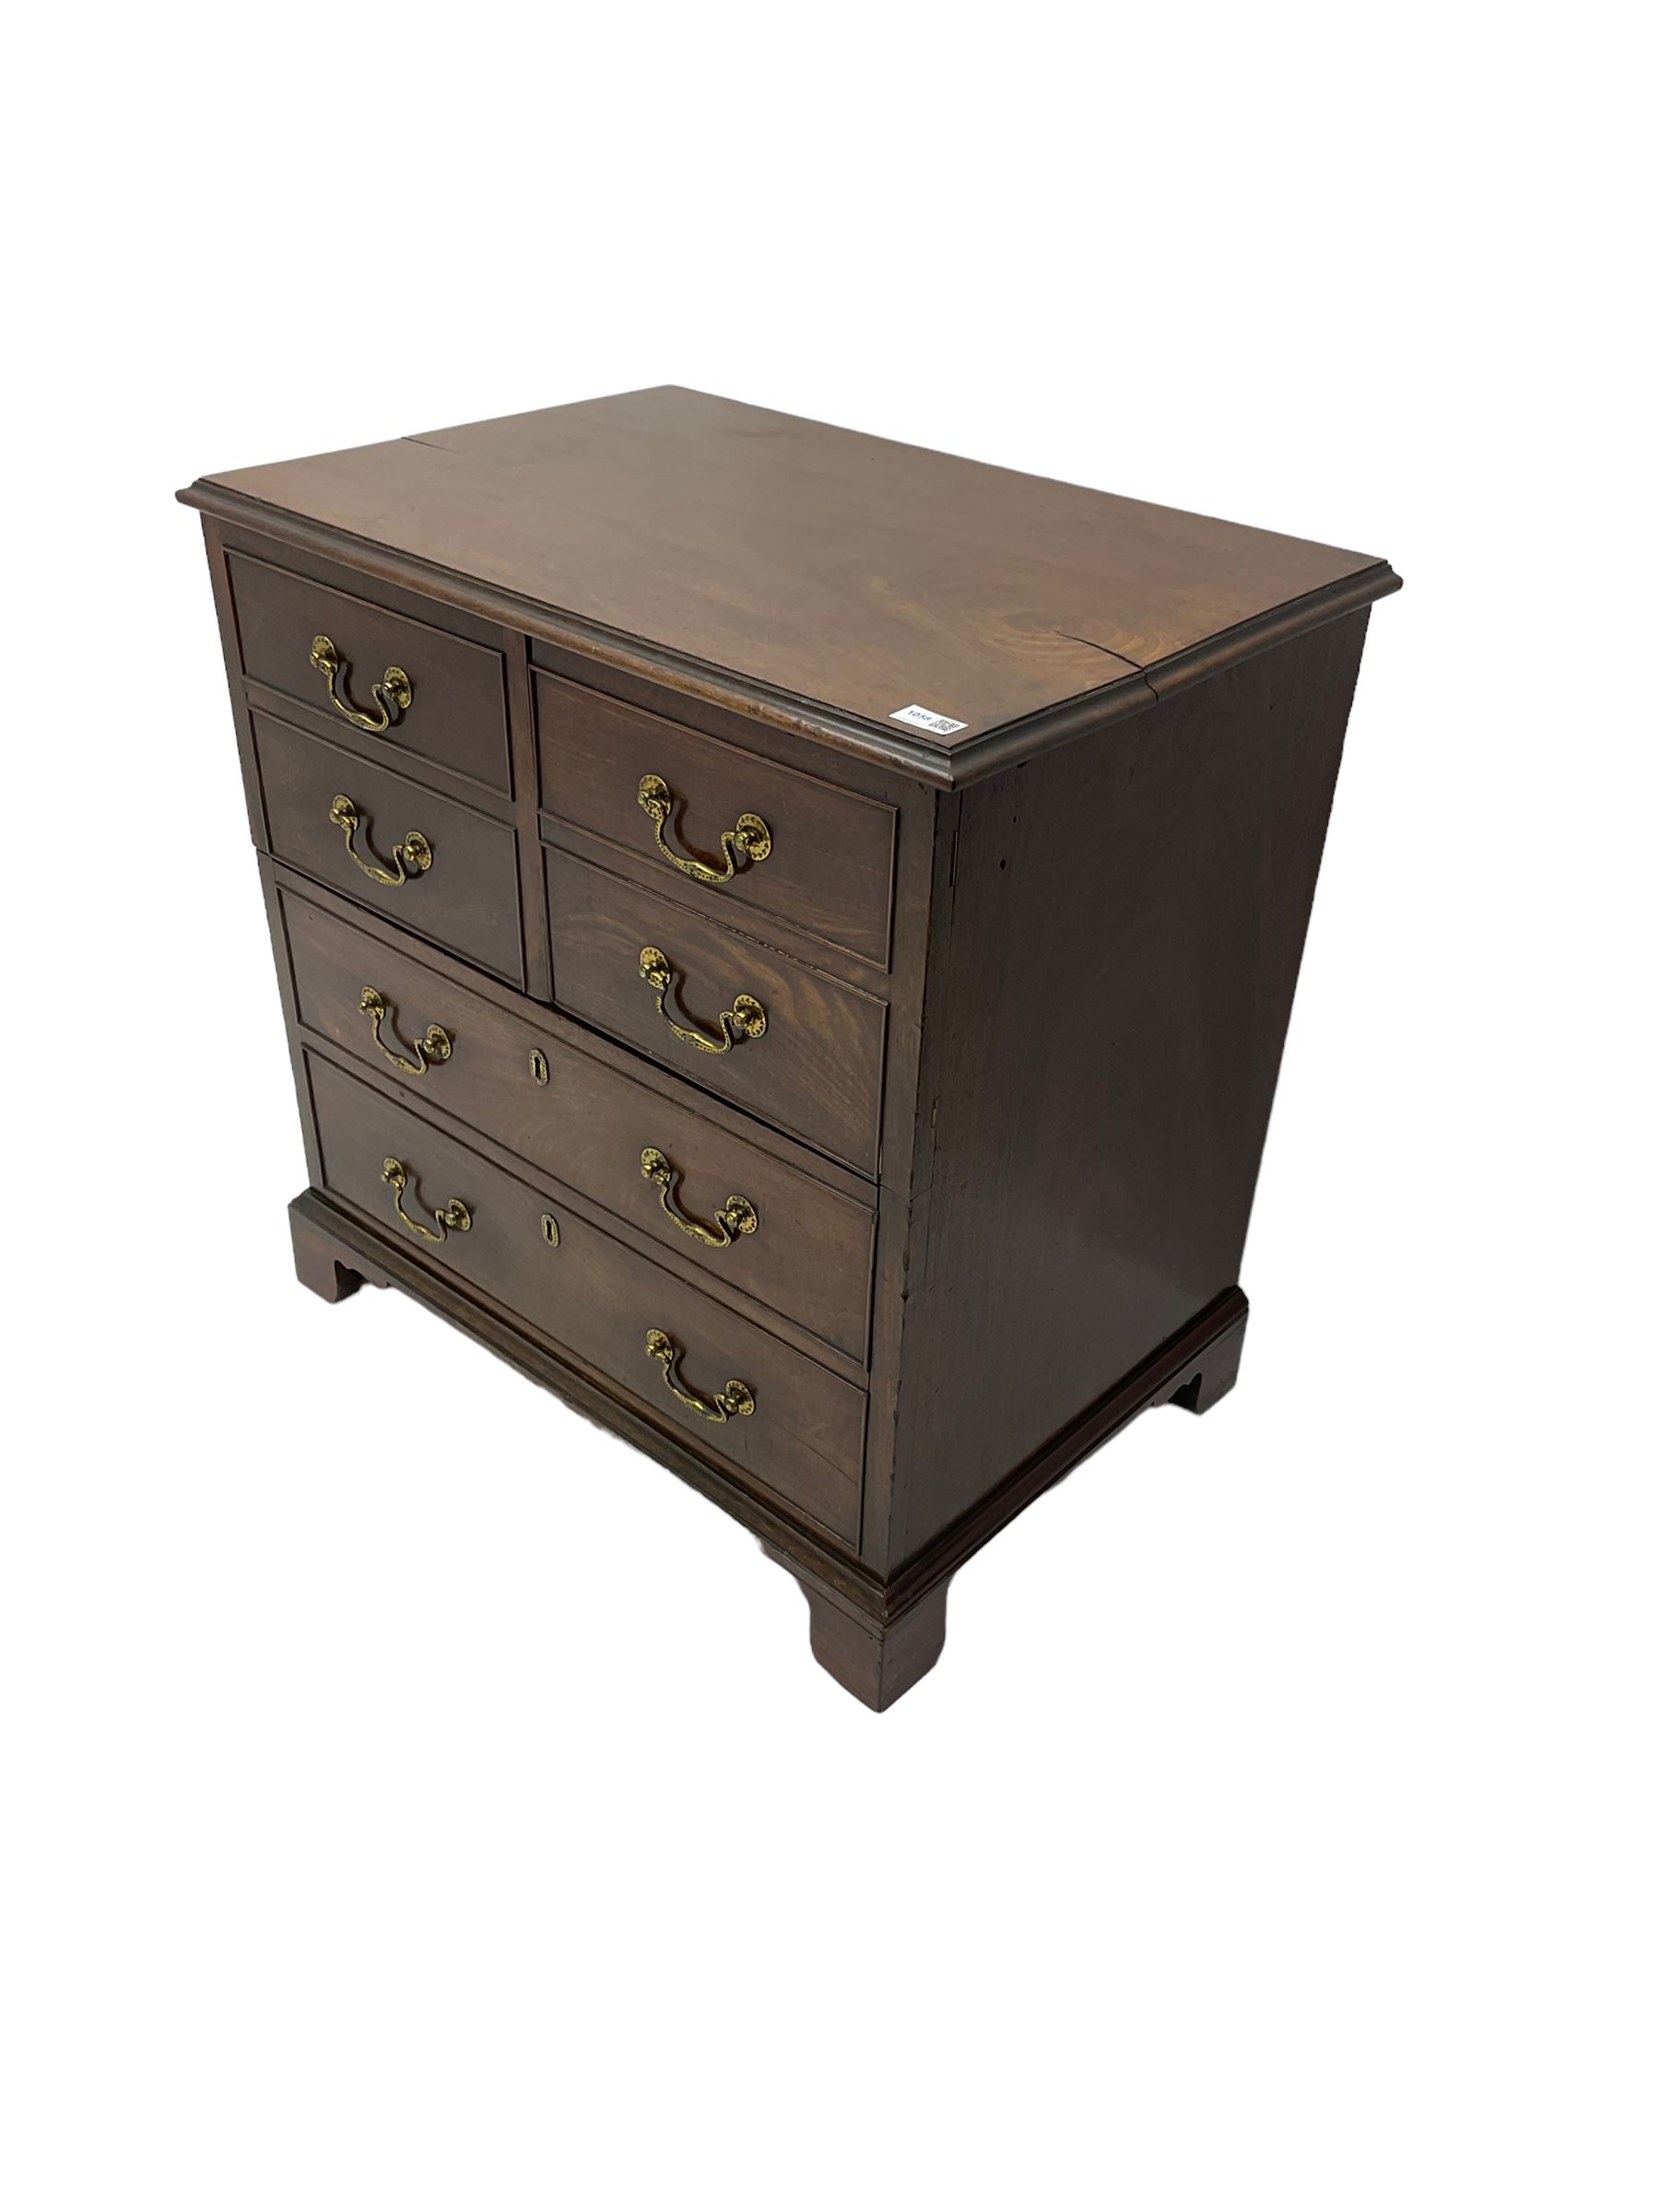 George III mahogany commode chest - Image 4 of 7